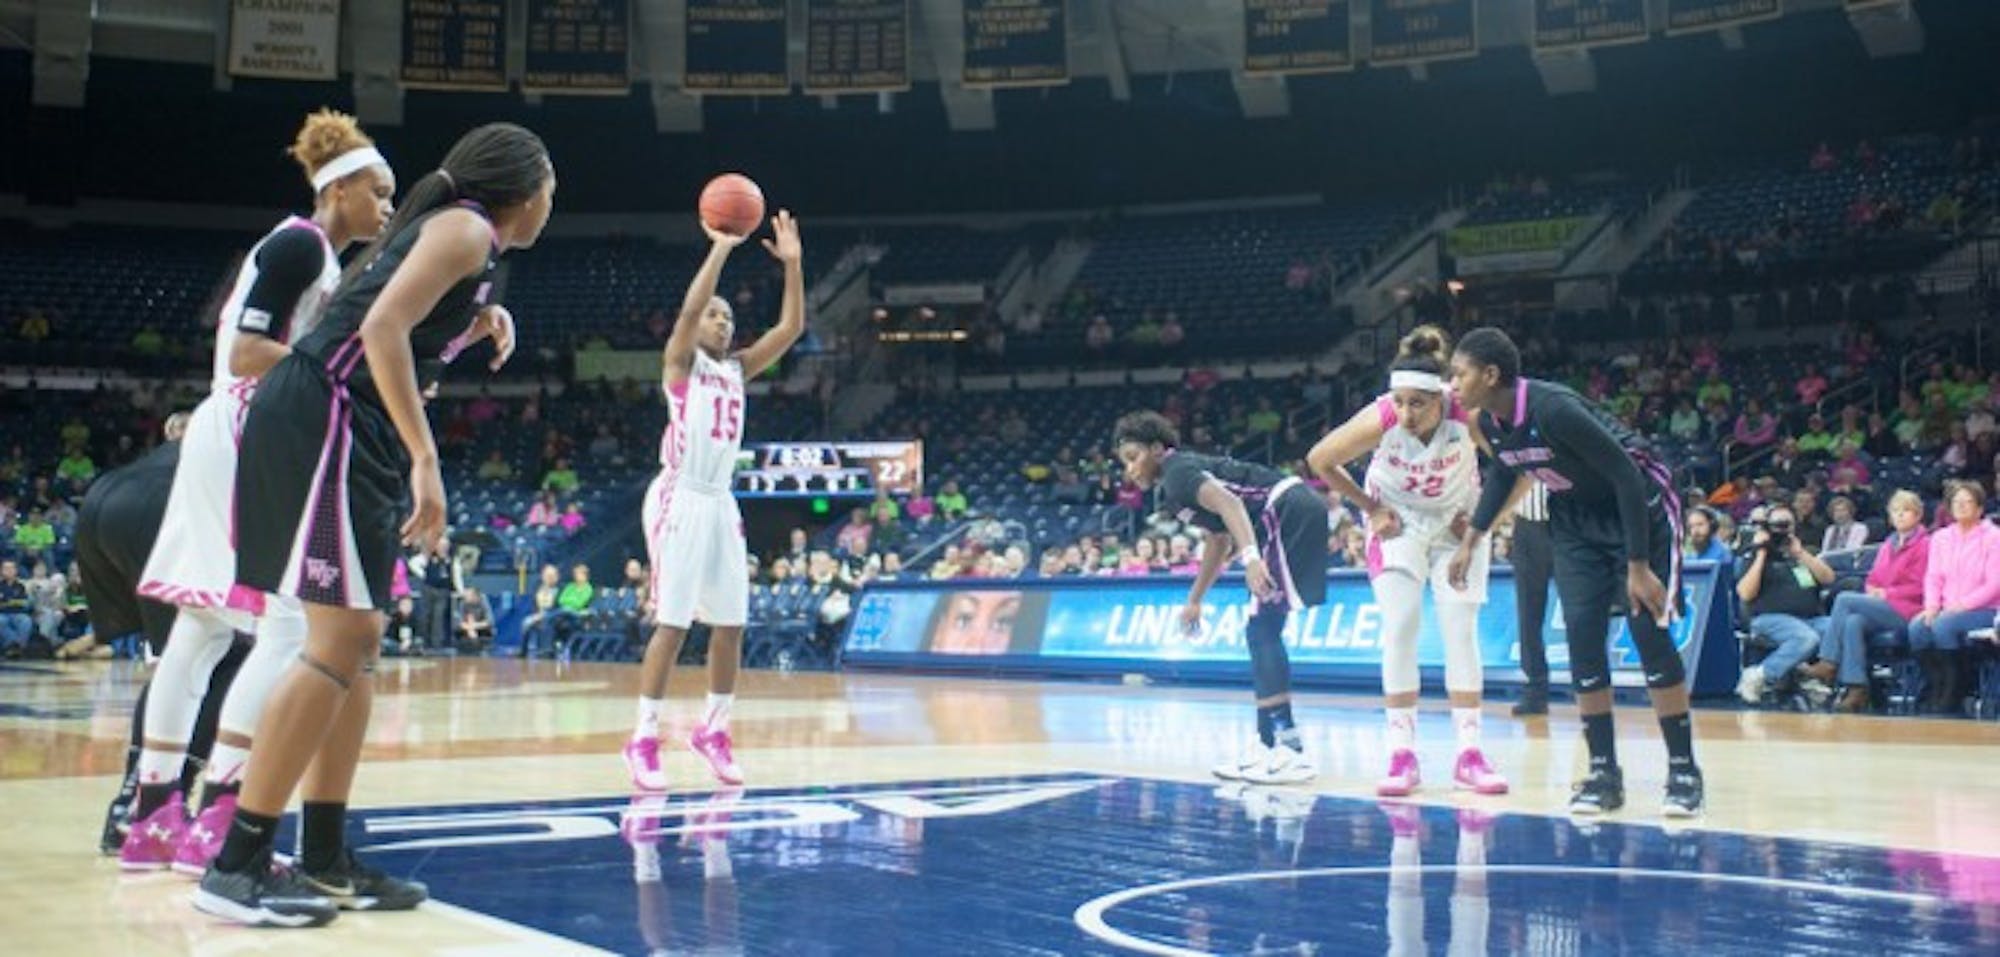 Irish sophomore Lindsay Allen attempts a free throw against Wake Forest on Feb. 1. Notre Dame has beaten their last five conference opponents by an average score of 29 points.